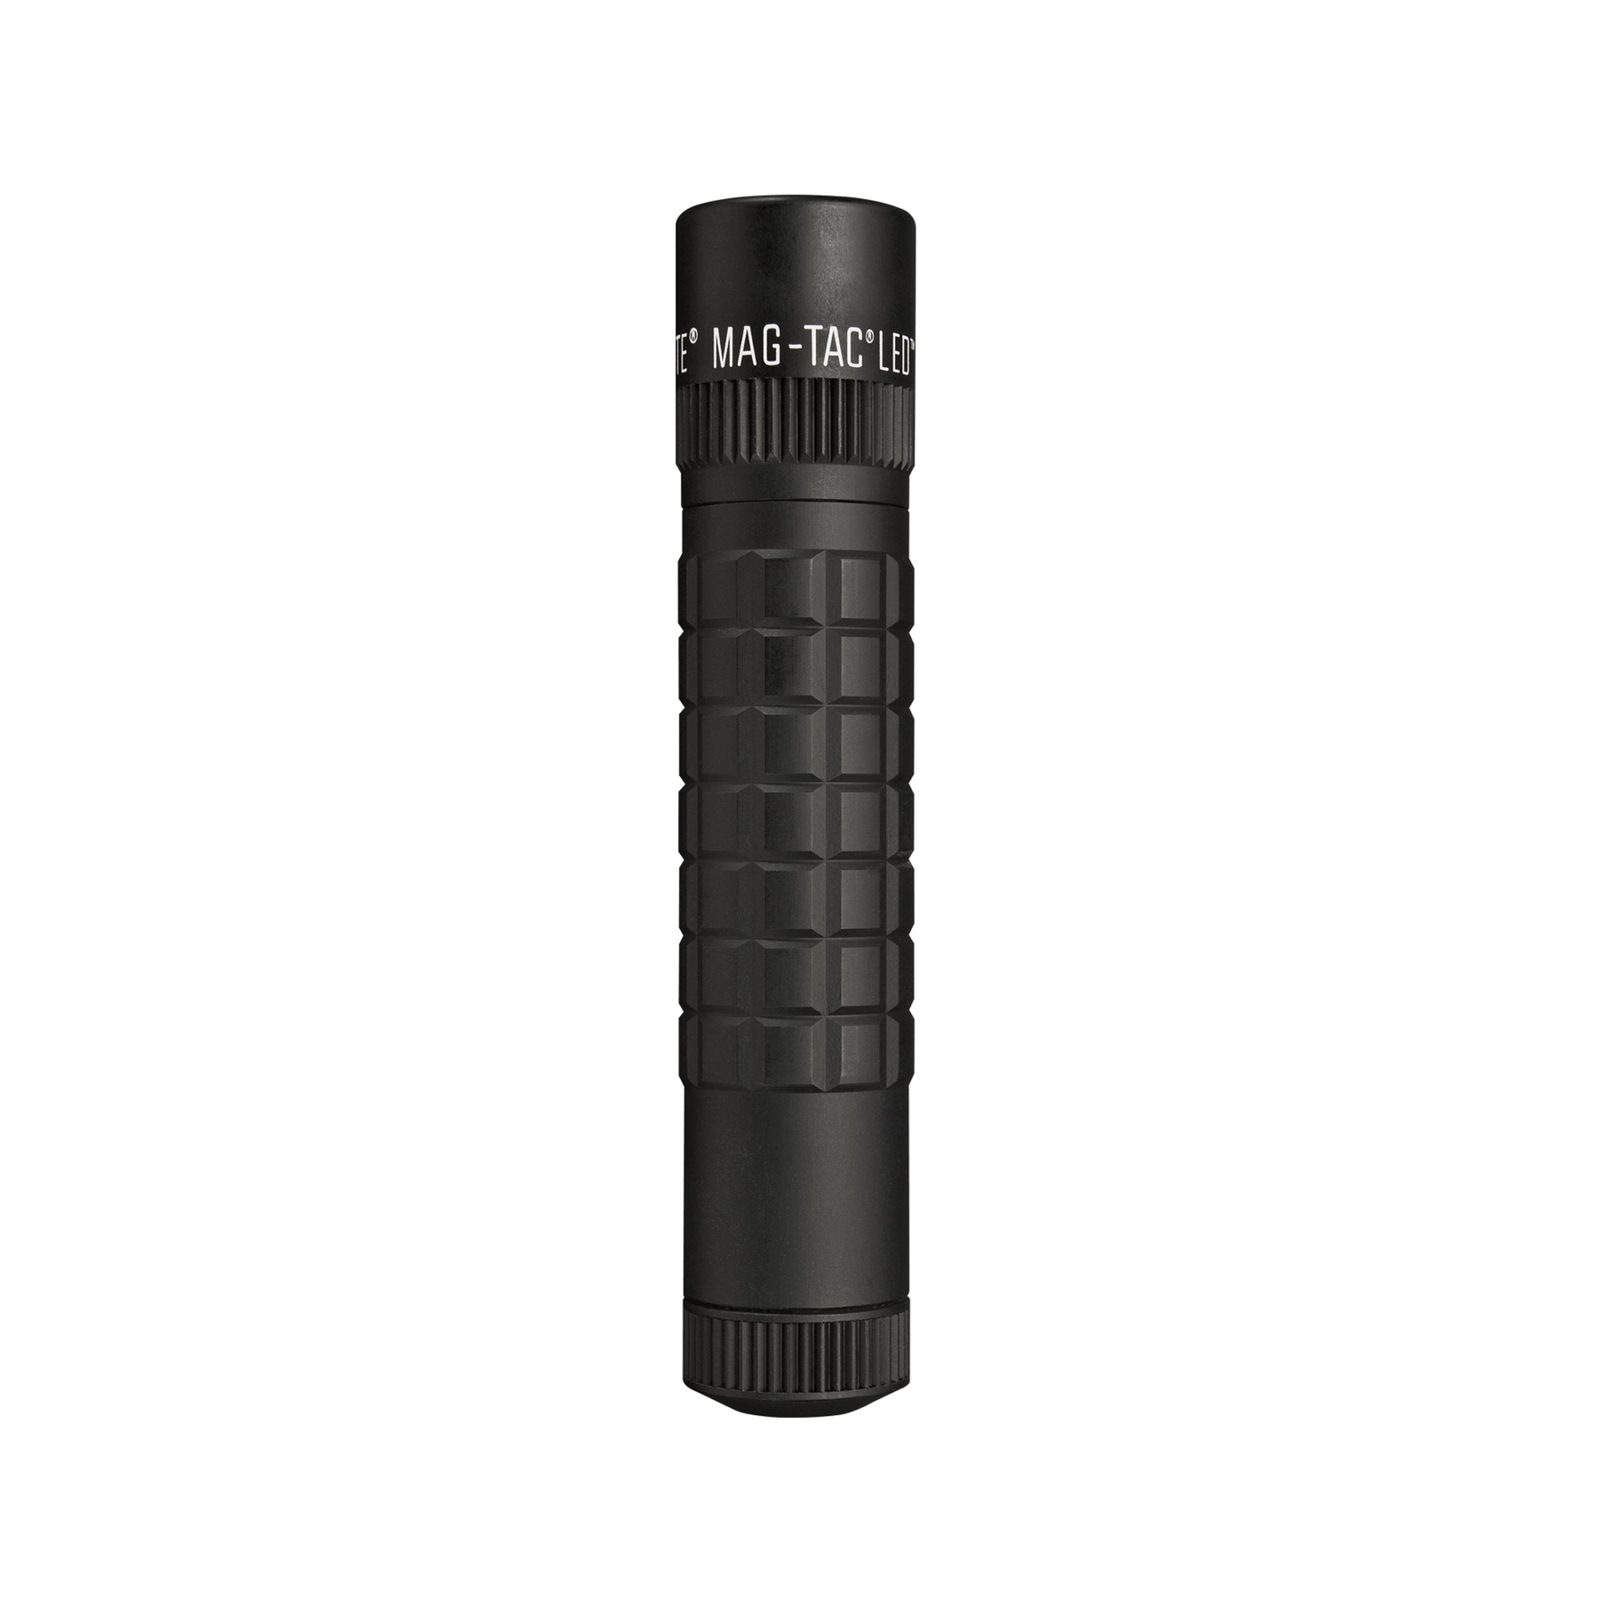 Torcia a LED Maglite Mag-Tac, 2 Cell CR123, nera